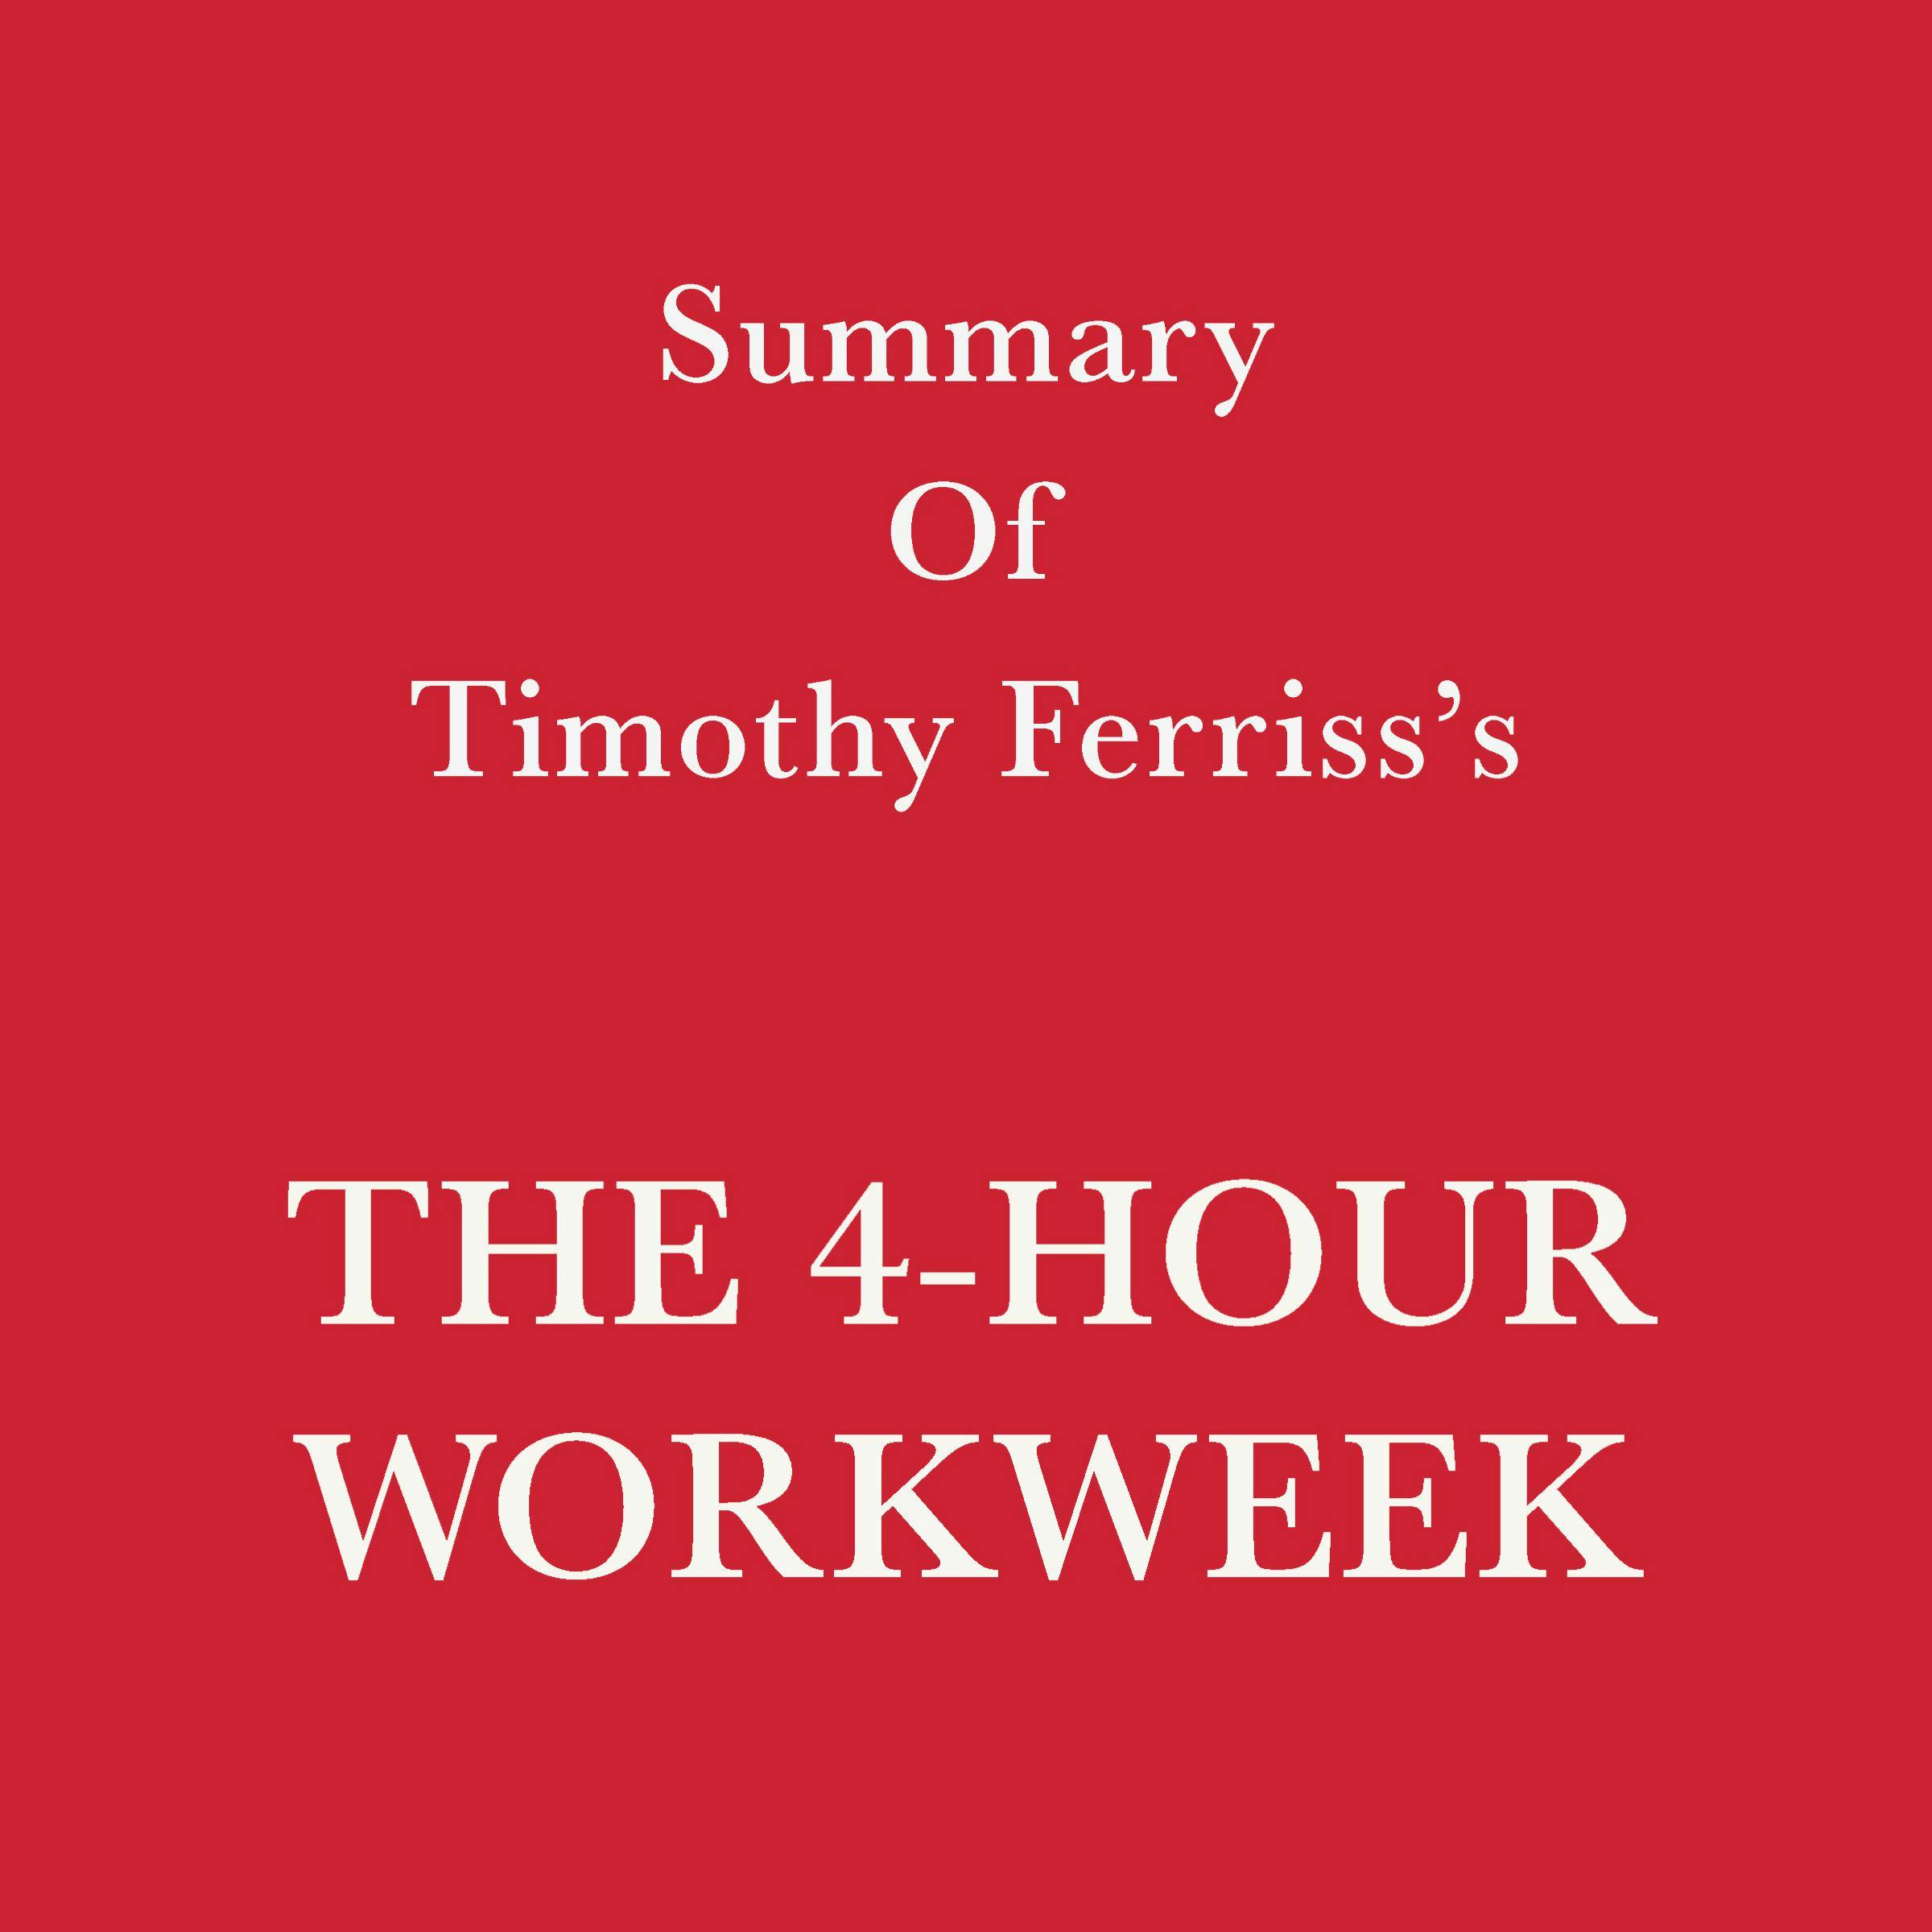 Summary of Timothy Ferriss's The 4-Hour Workweek - undefined